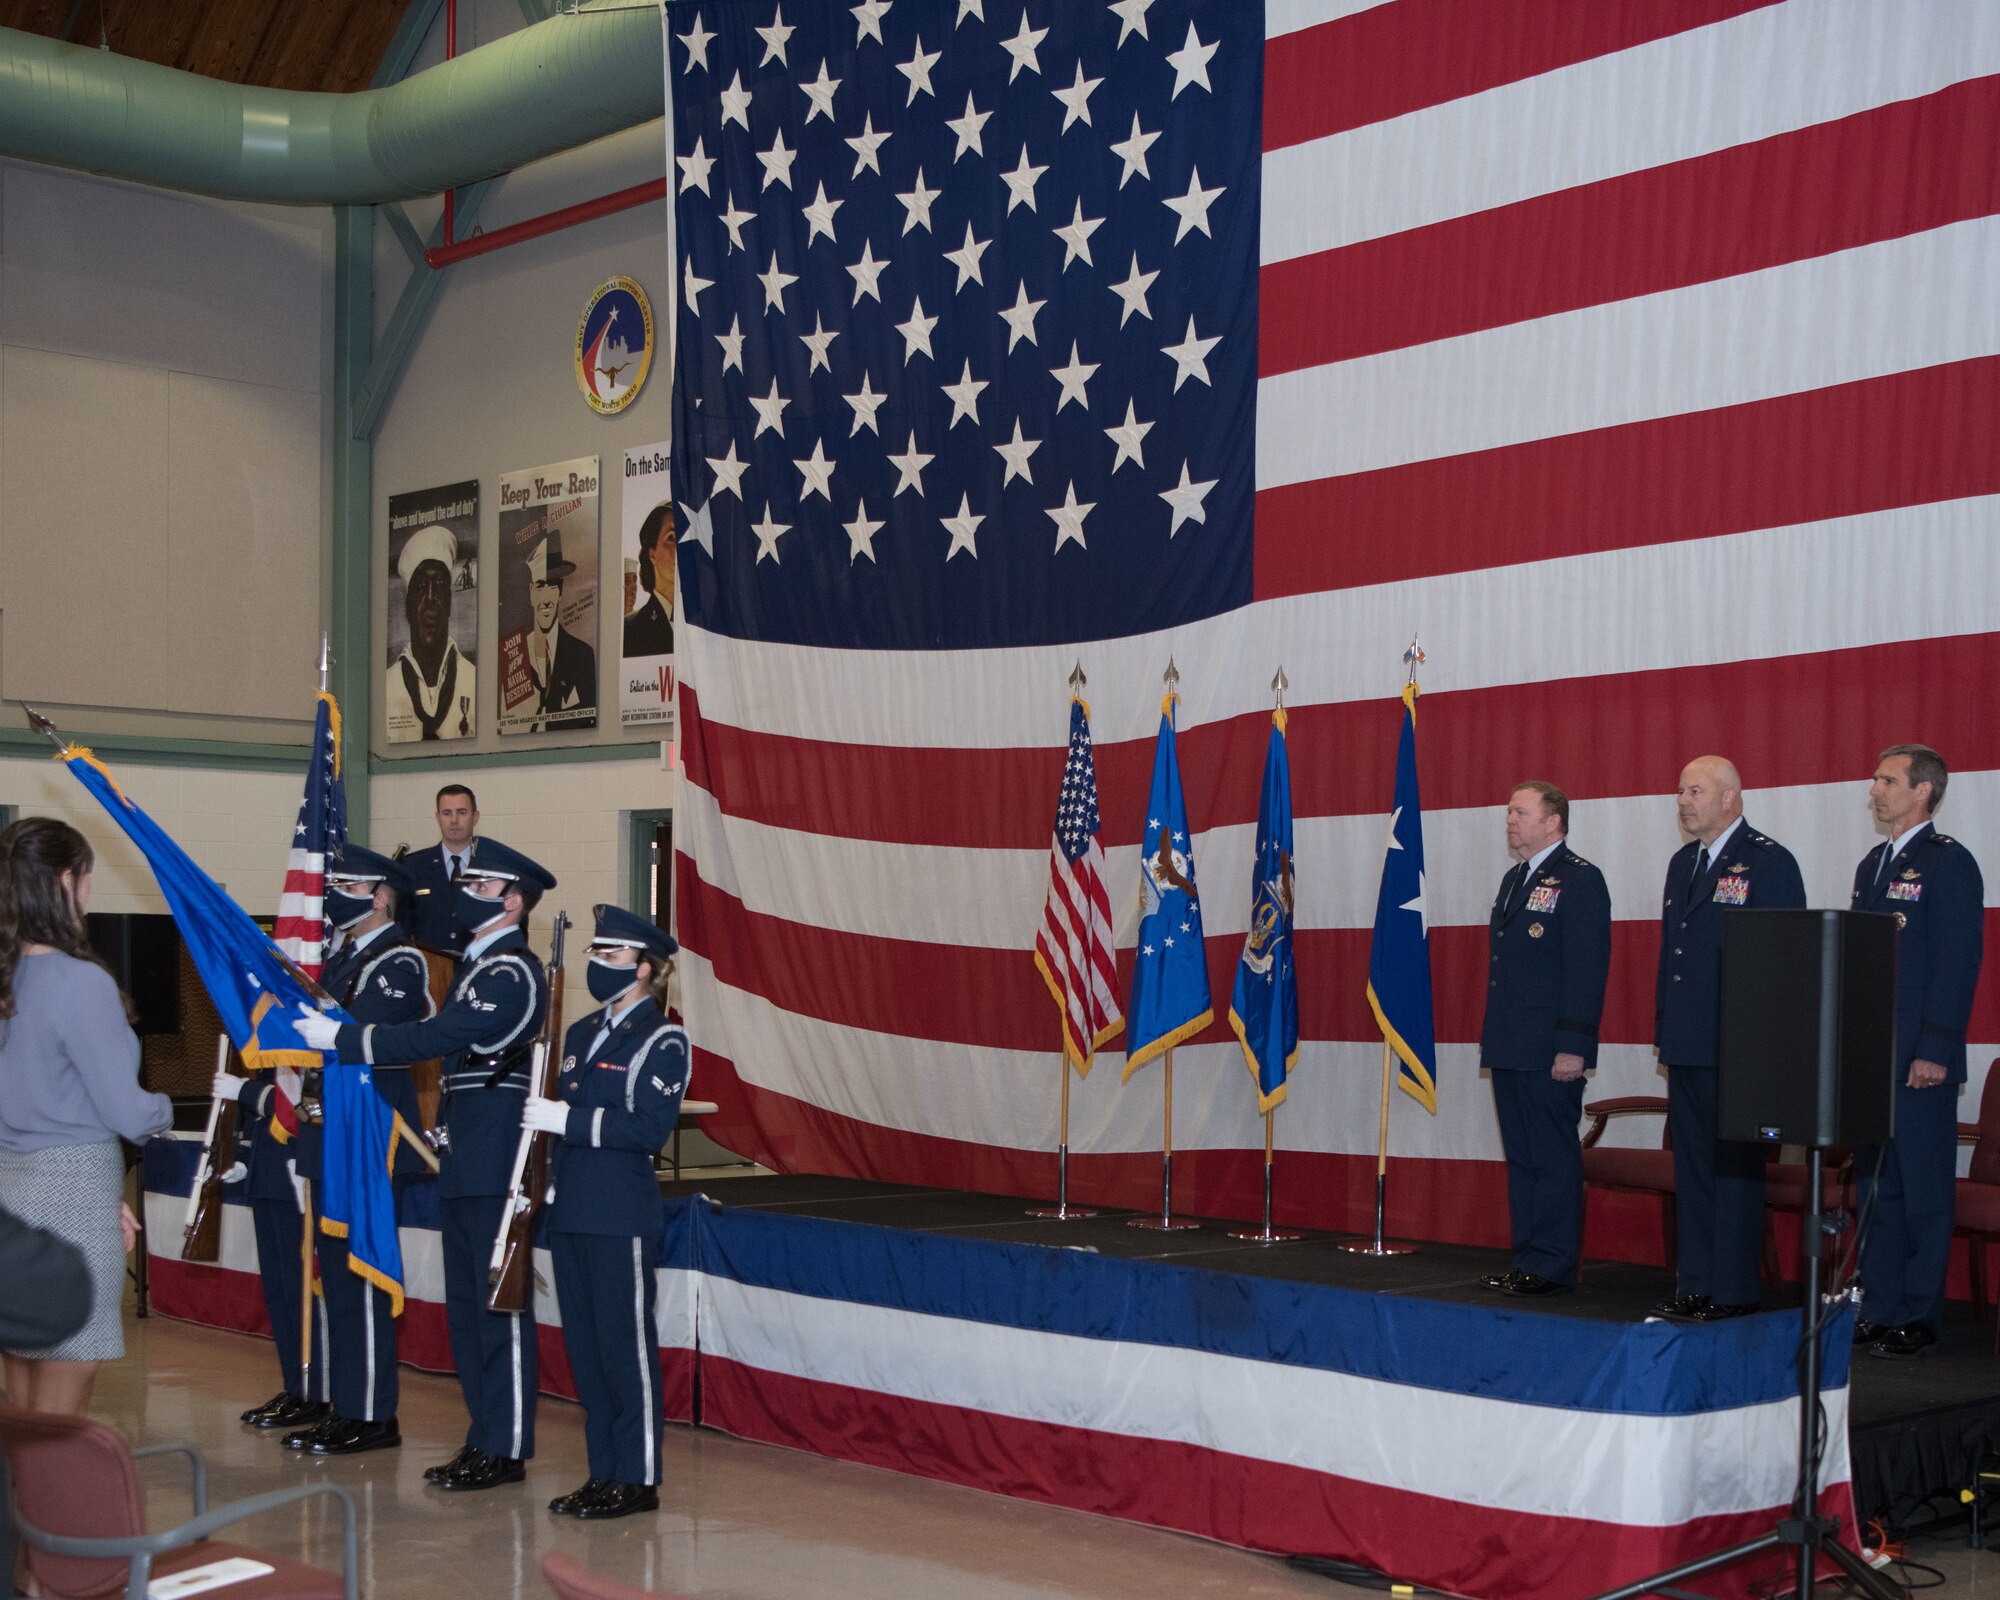 The Dyess Air Force Base Honor Guard presented the Colors at the Tenth Air Force Base Change of Command June 4, 2021.